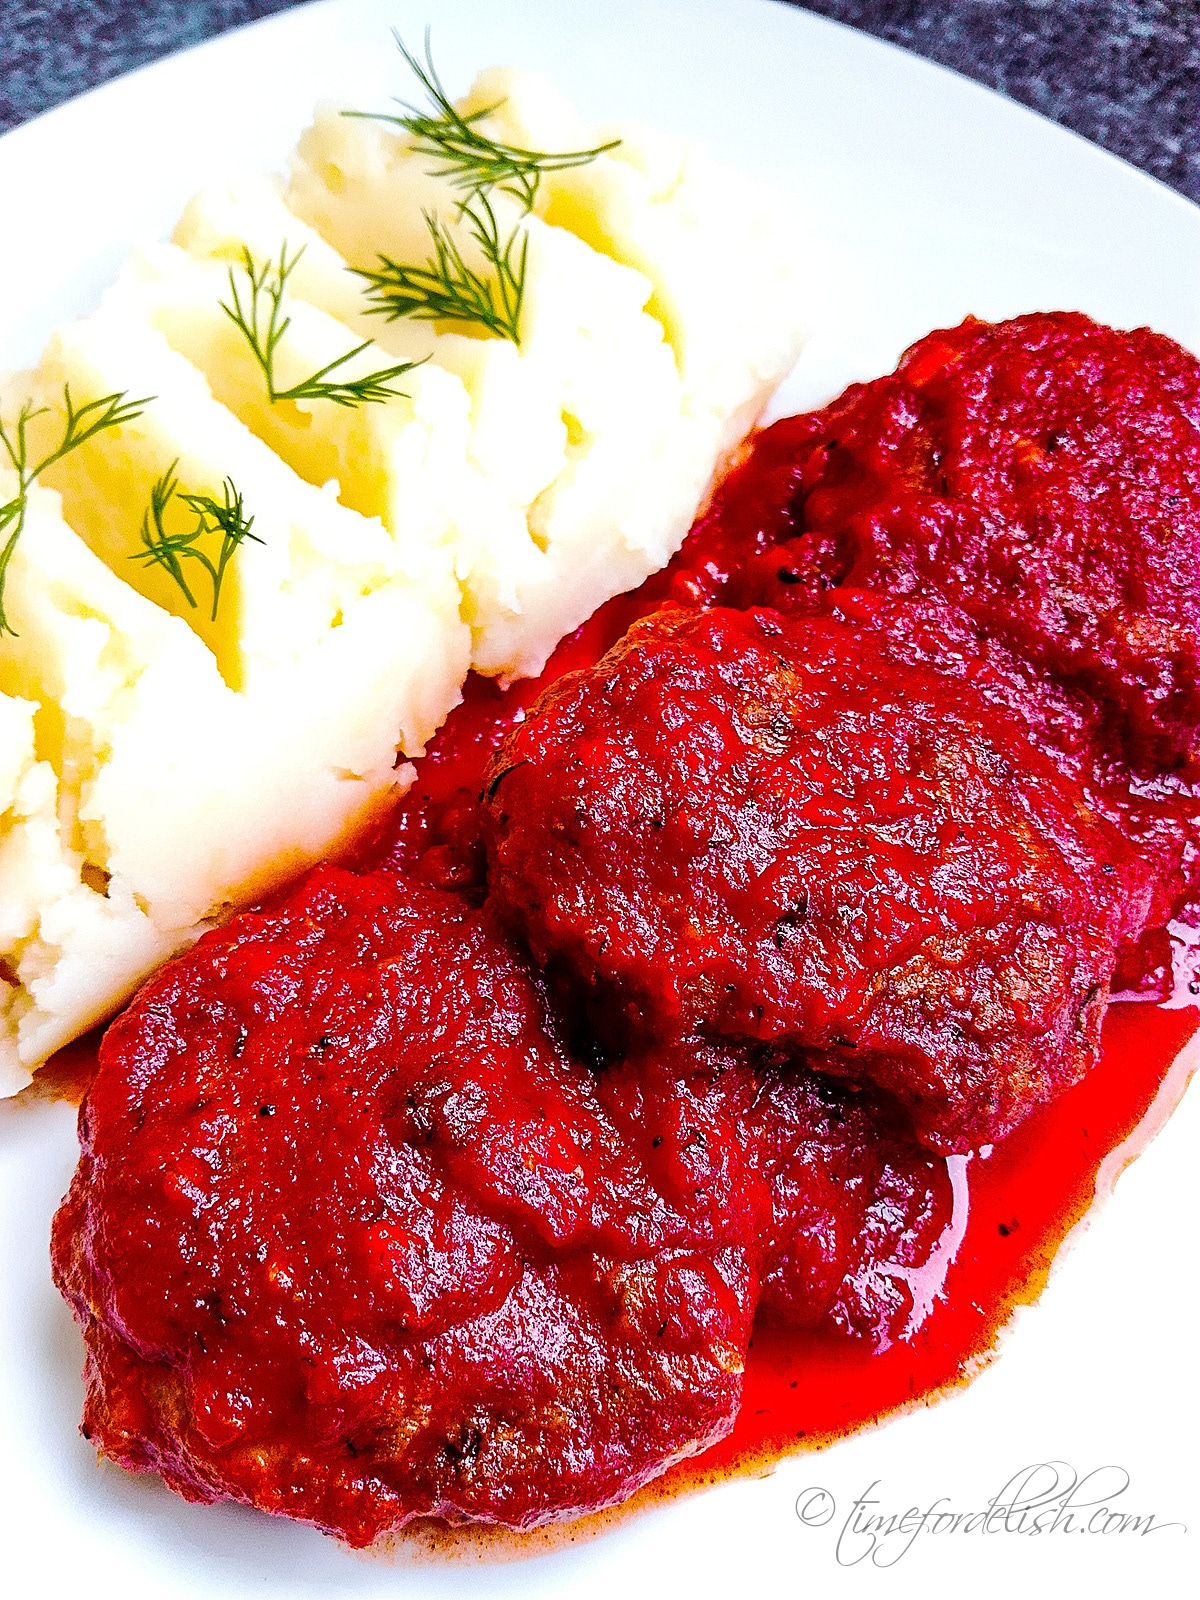 meatballs with tomato sauce and mashed potatoes